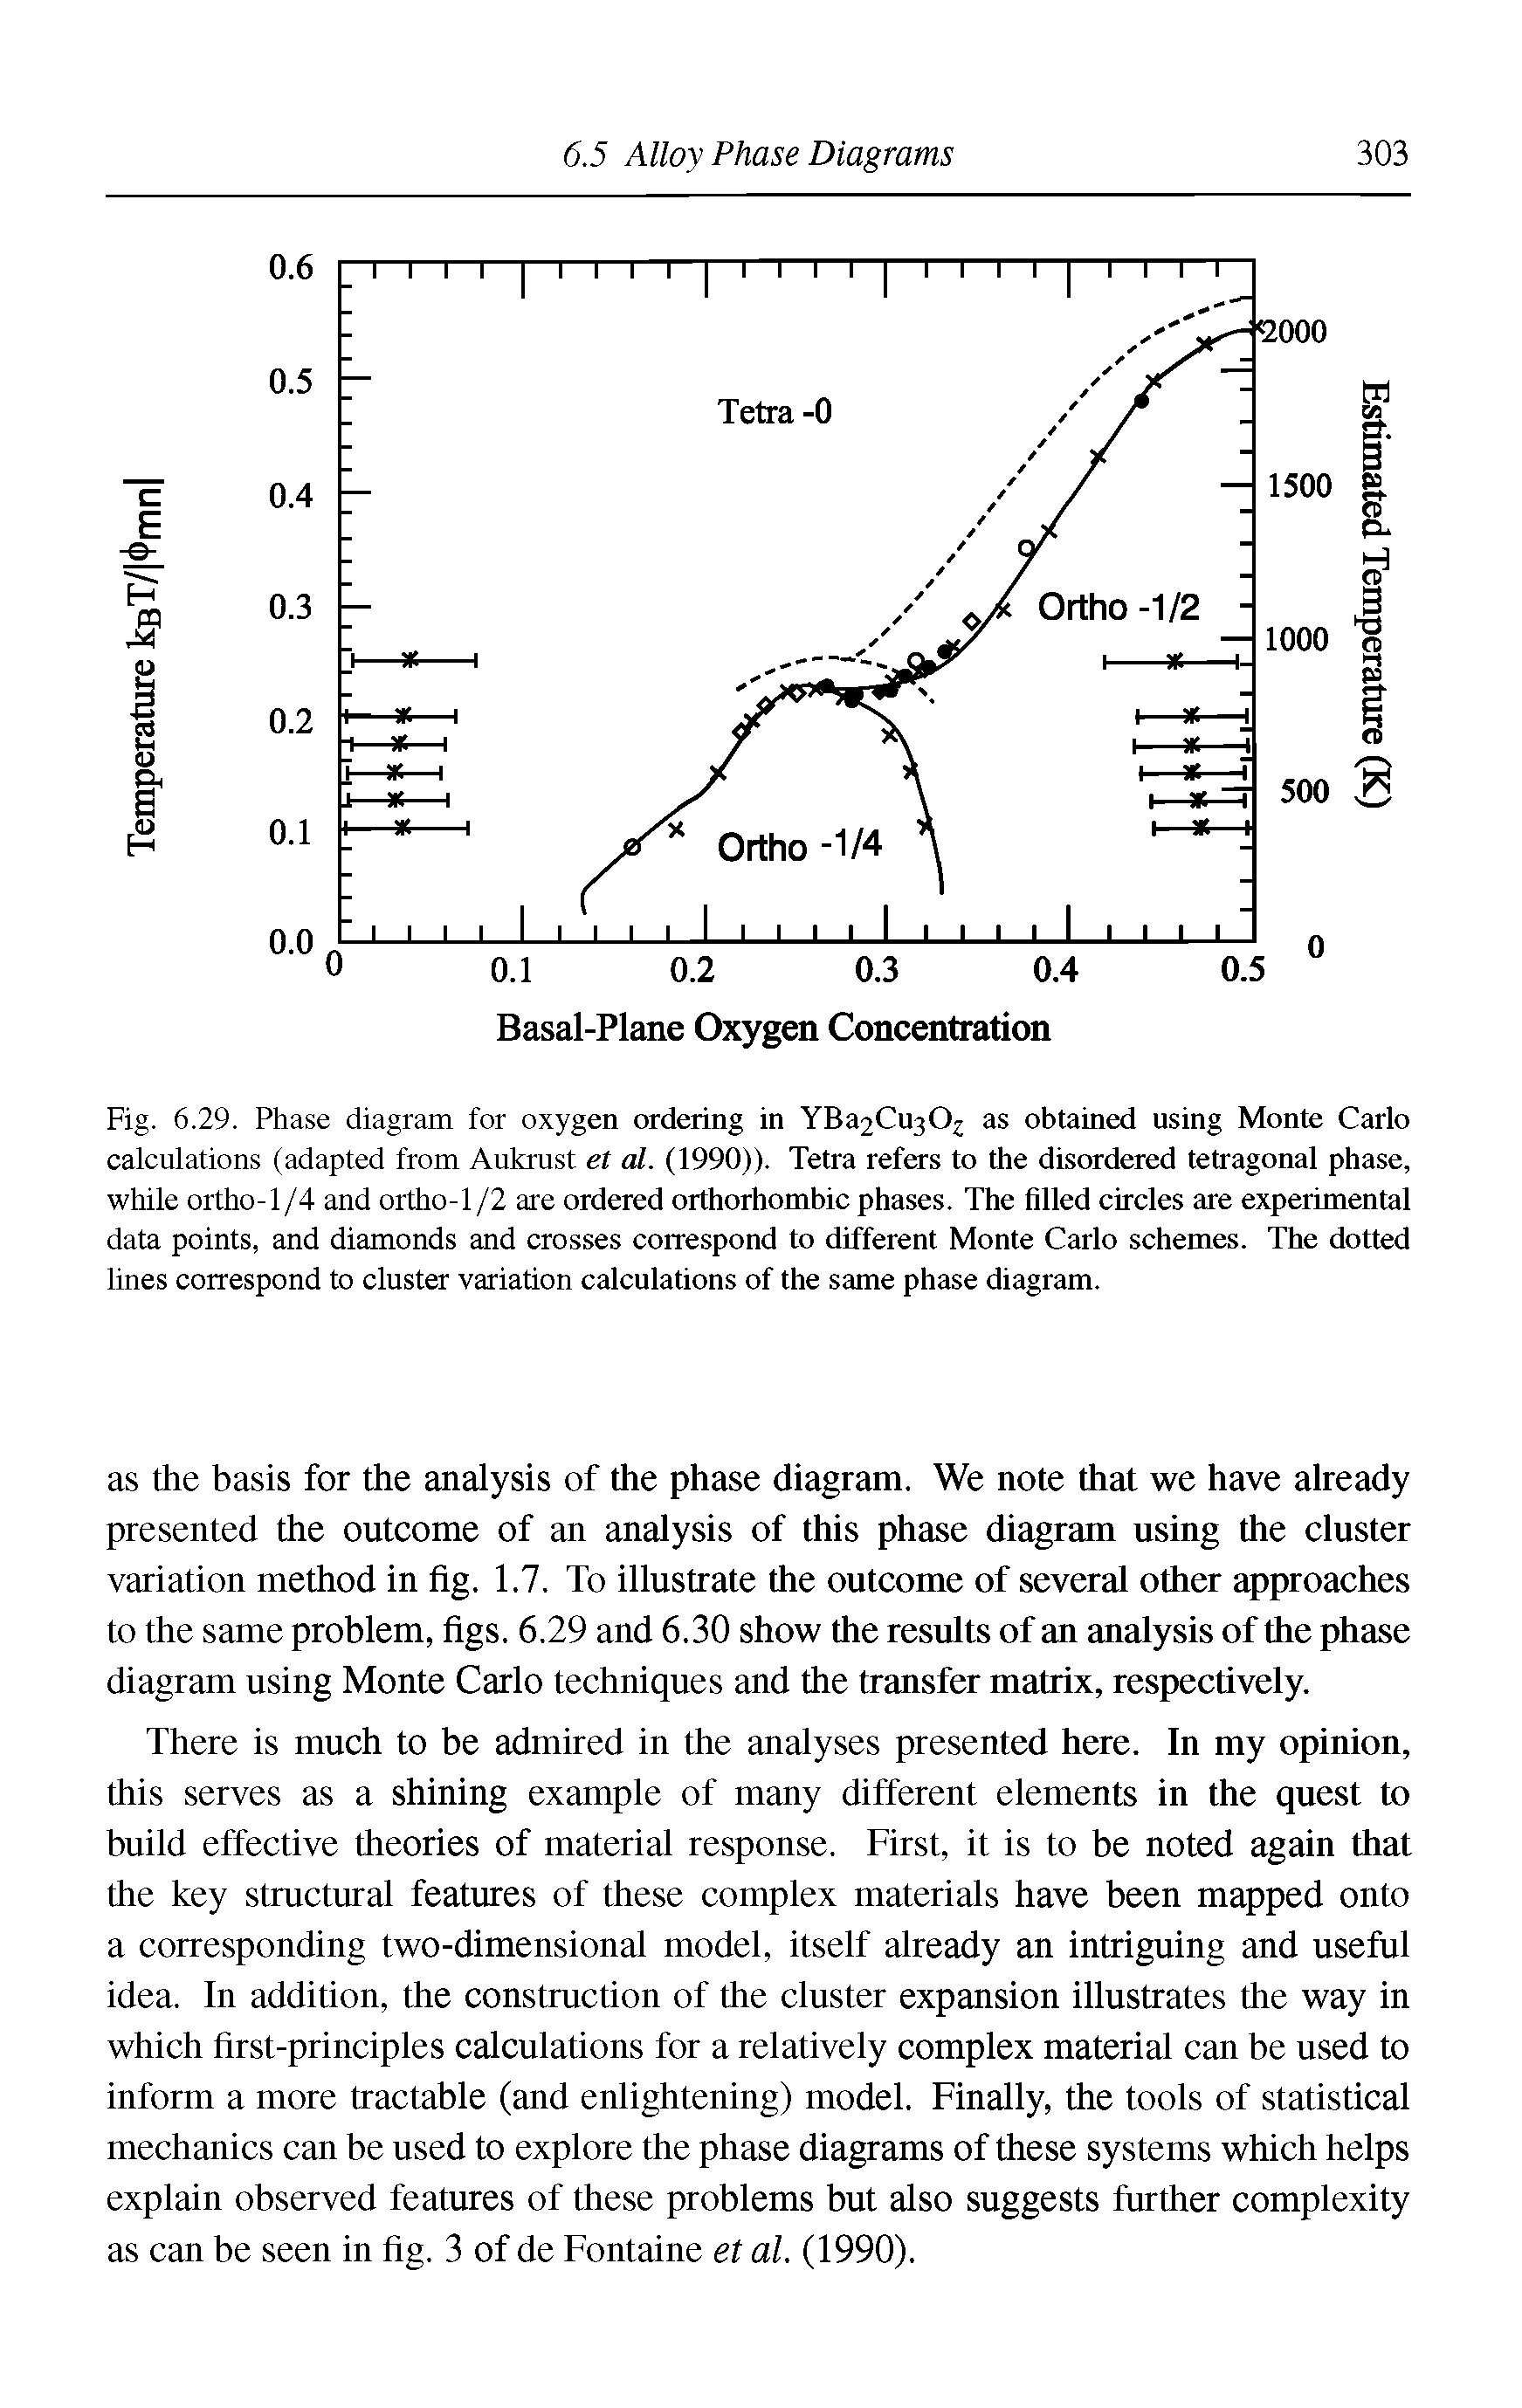 Fig. 6.29. Phase diagram for oxygen ordering in YBa2Cu30 as obtained using Monte Carlo calculations (adapted from Aukrust et al. (1990)). Tetra refers to the disordered tetragonal phase, while ortho-1/4 and ortho-1 /2 are ordered orthorhomhic phases. The filled circles are experimental data points, and diamonds and crosses correspond to different Monte Carlo schemes. The dotted lines correspond to cluster variation calculations of the same phase diagram.